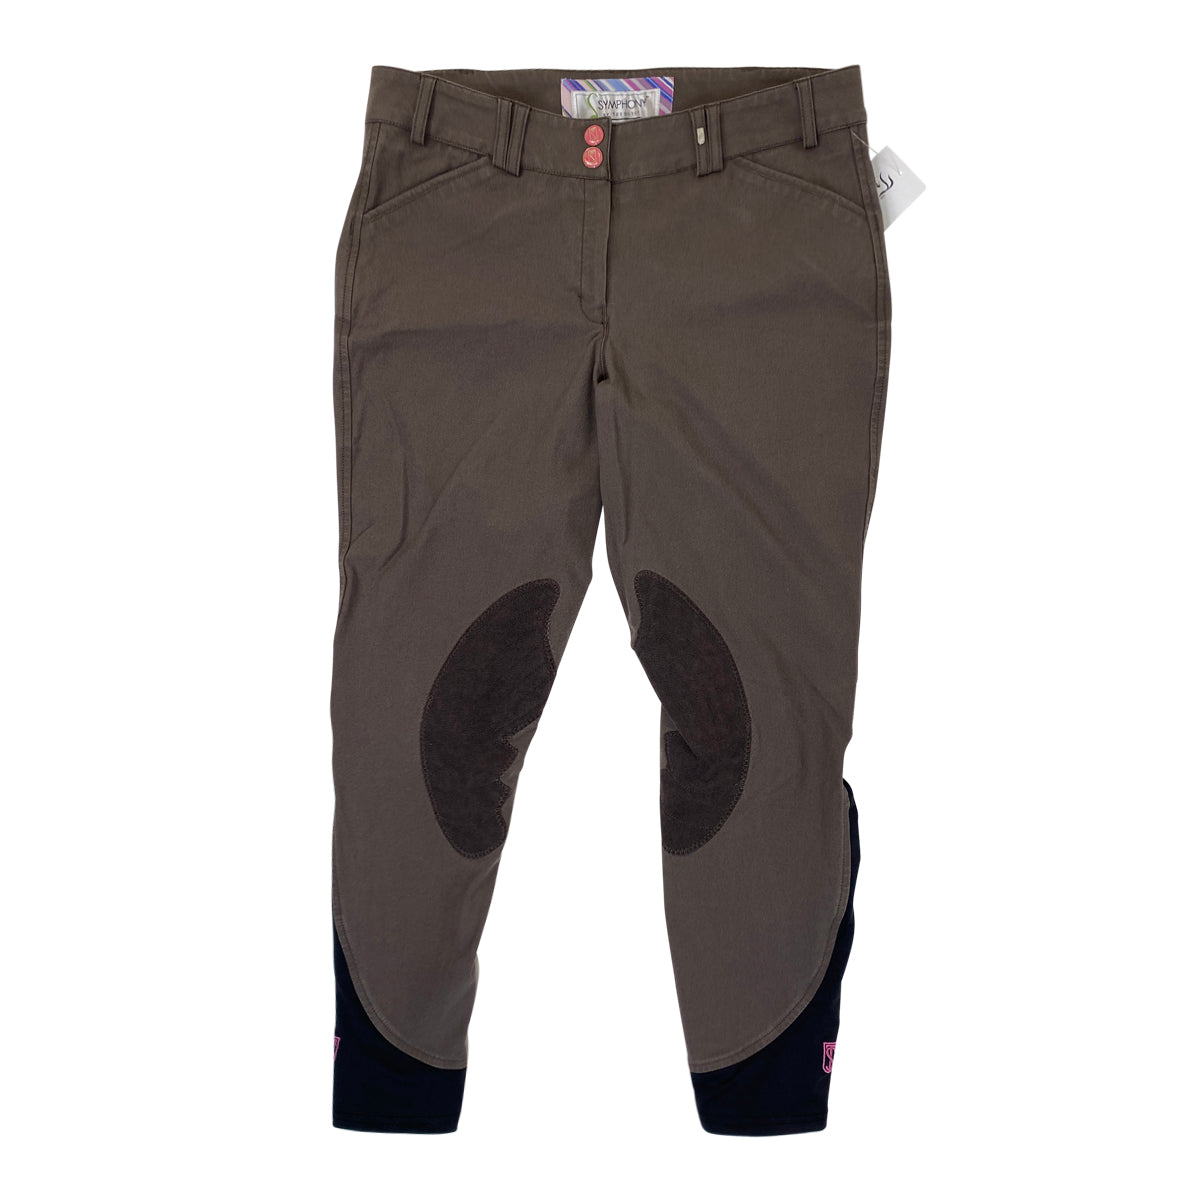 Tredstep 'Symphony Nero II' Knee Patch Breeches in Brown